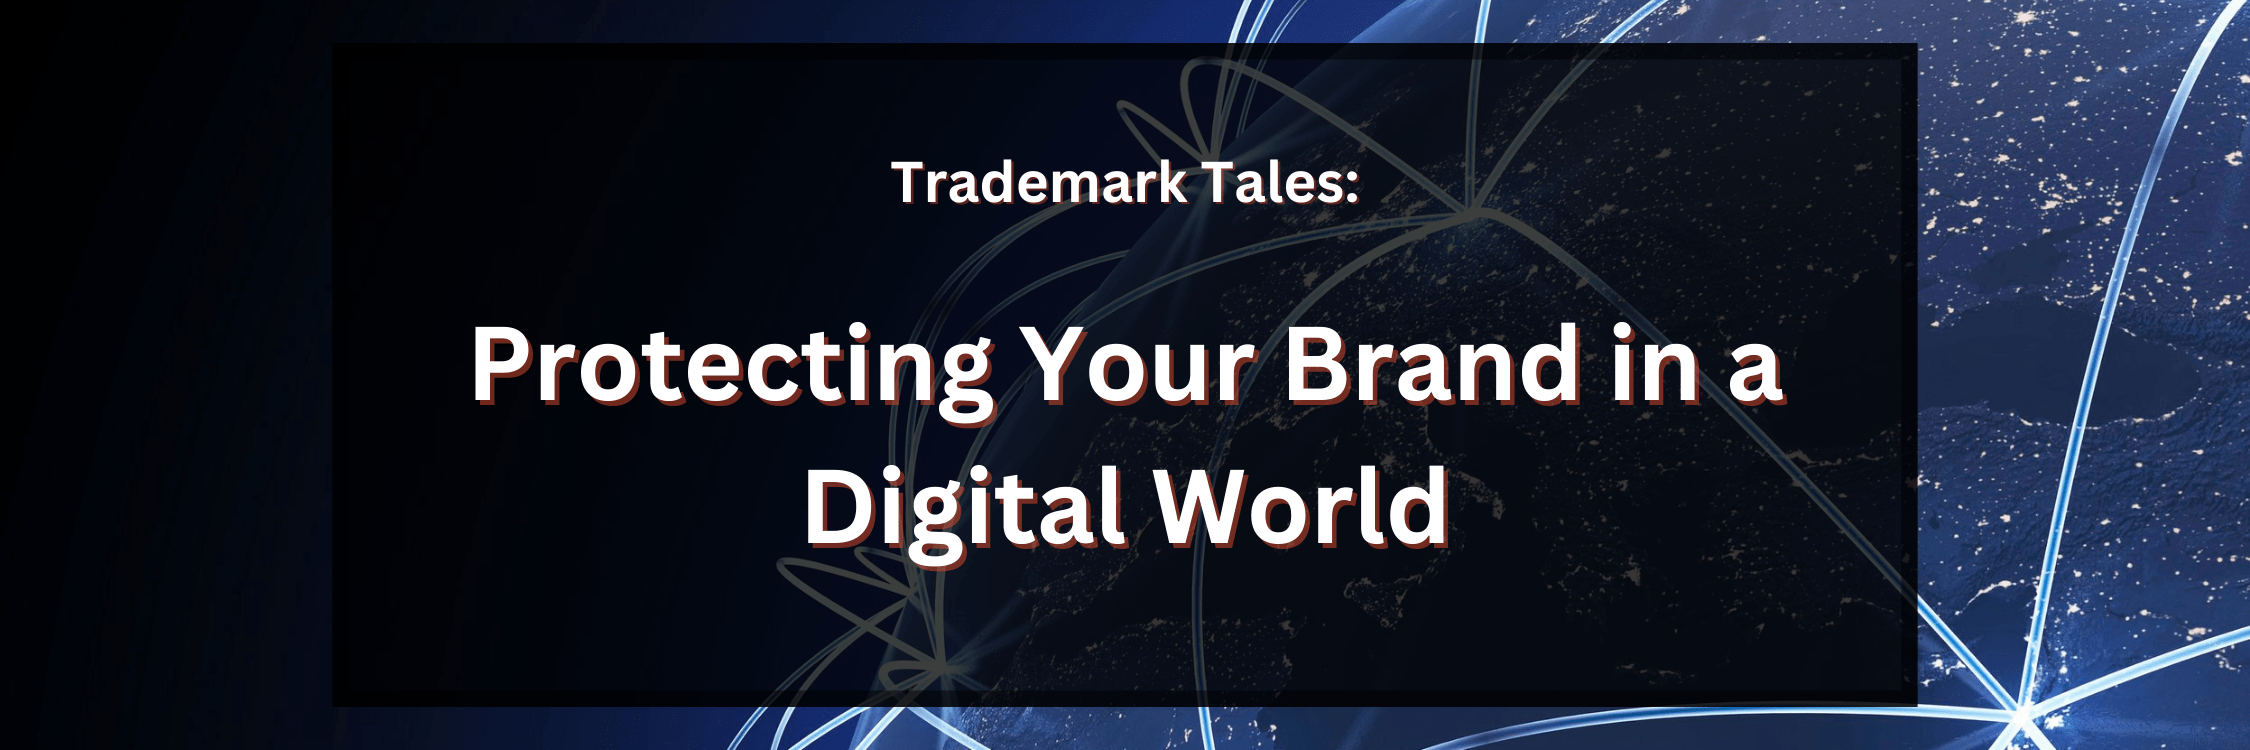 Trademark Tales Protecting Your Brand In A Digital World